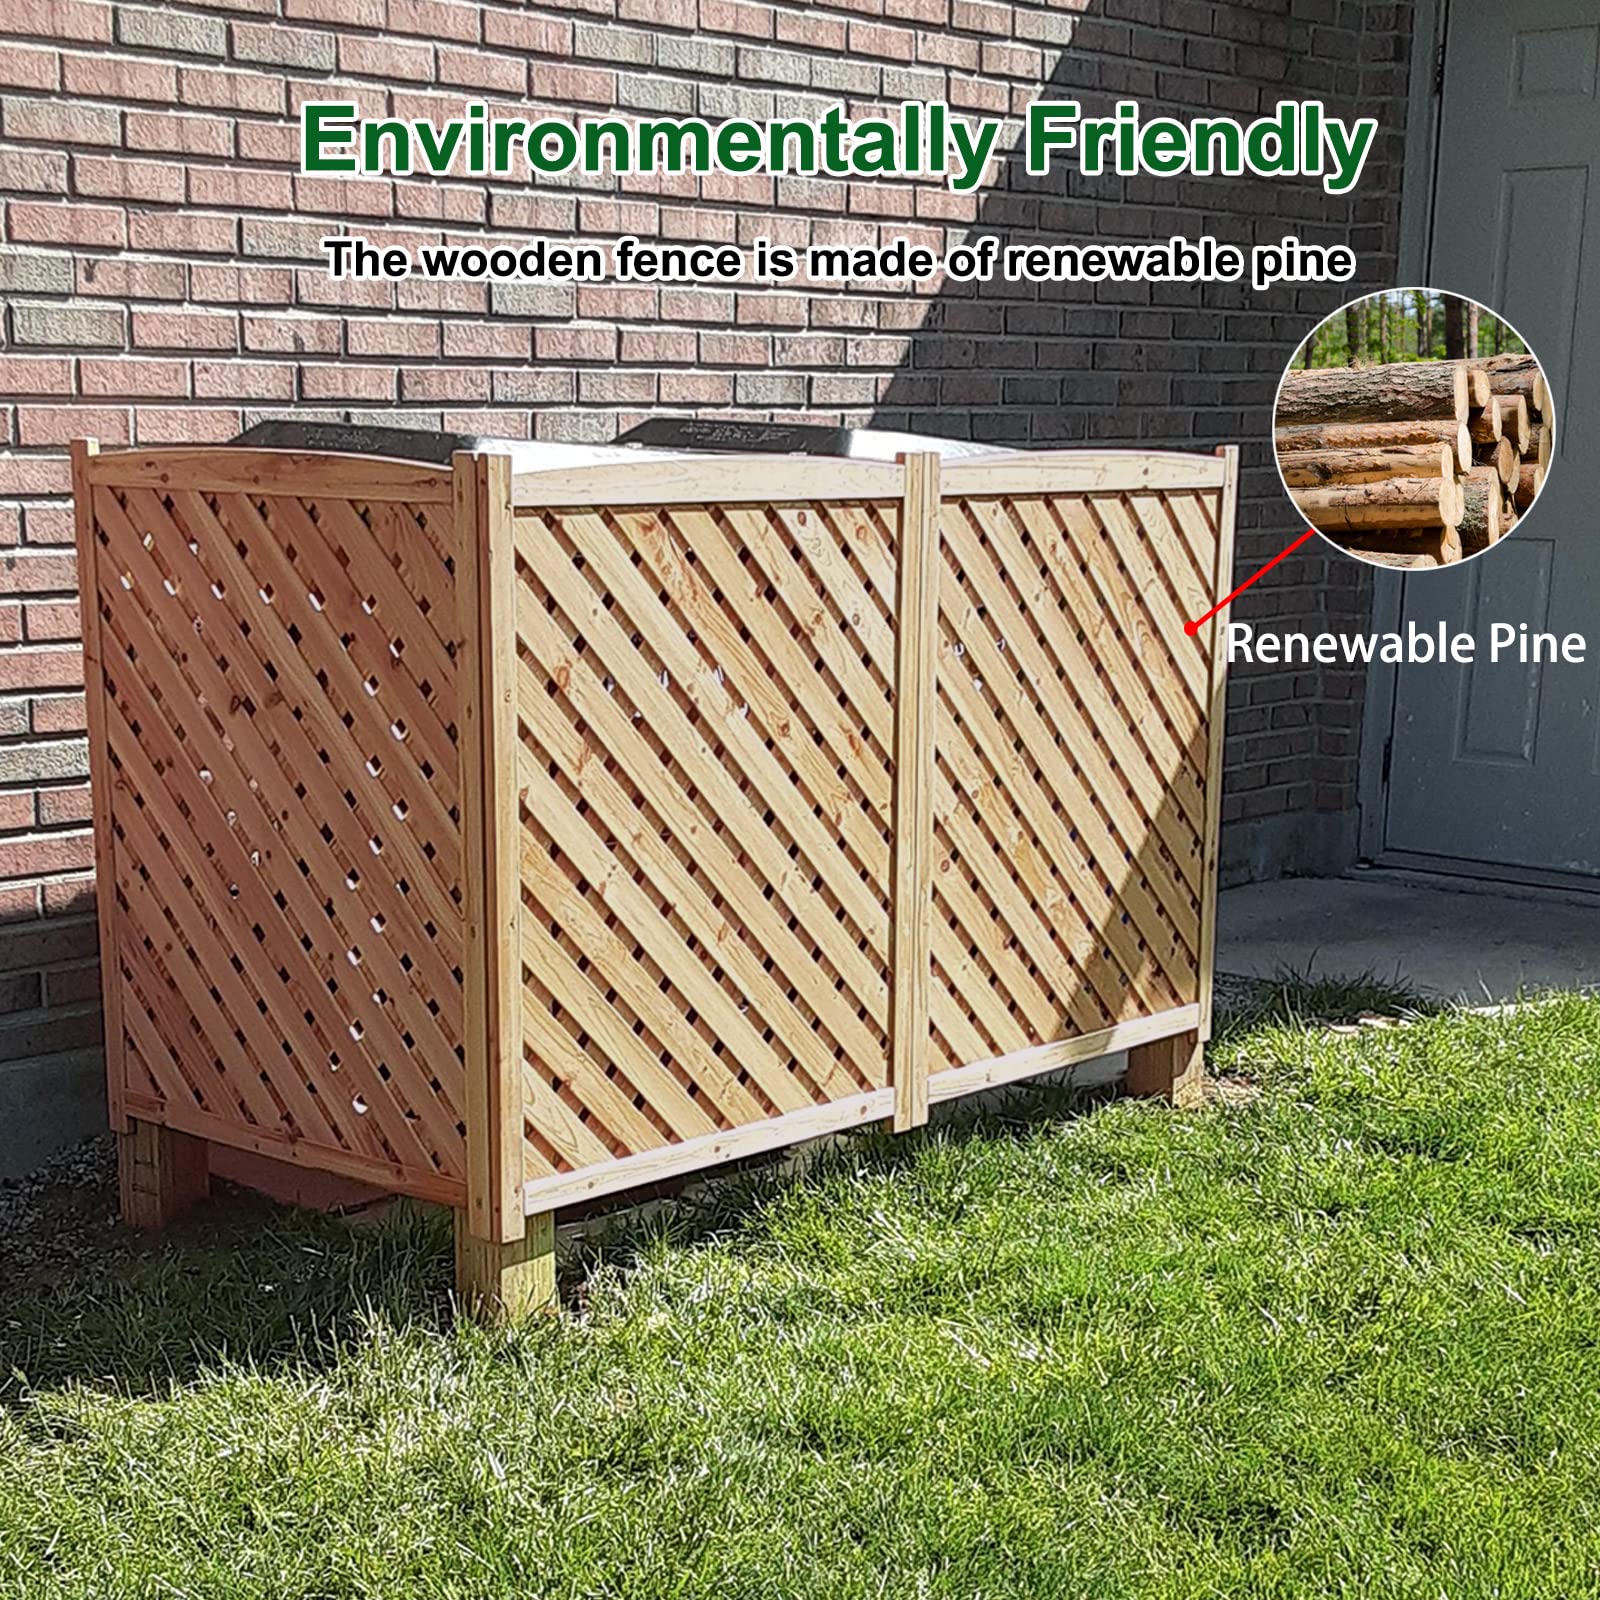 Xeeol Privacy Screen, 3 Panels Wood Fencing for Yard, Patio Lattice Panels for Outside, No Dig Fence Freestanding, Hide Outdoor Air Conditioner and Trash Enclosure